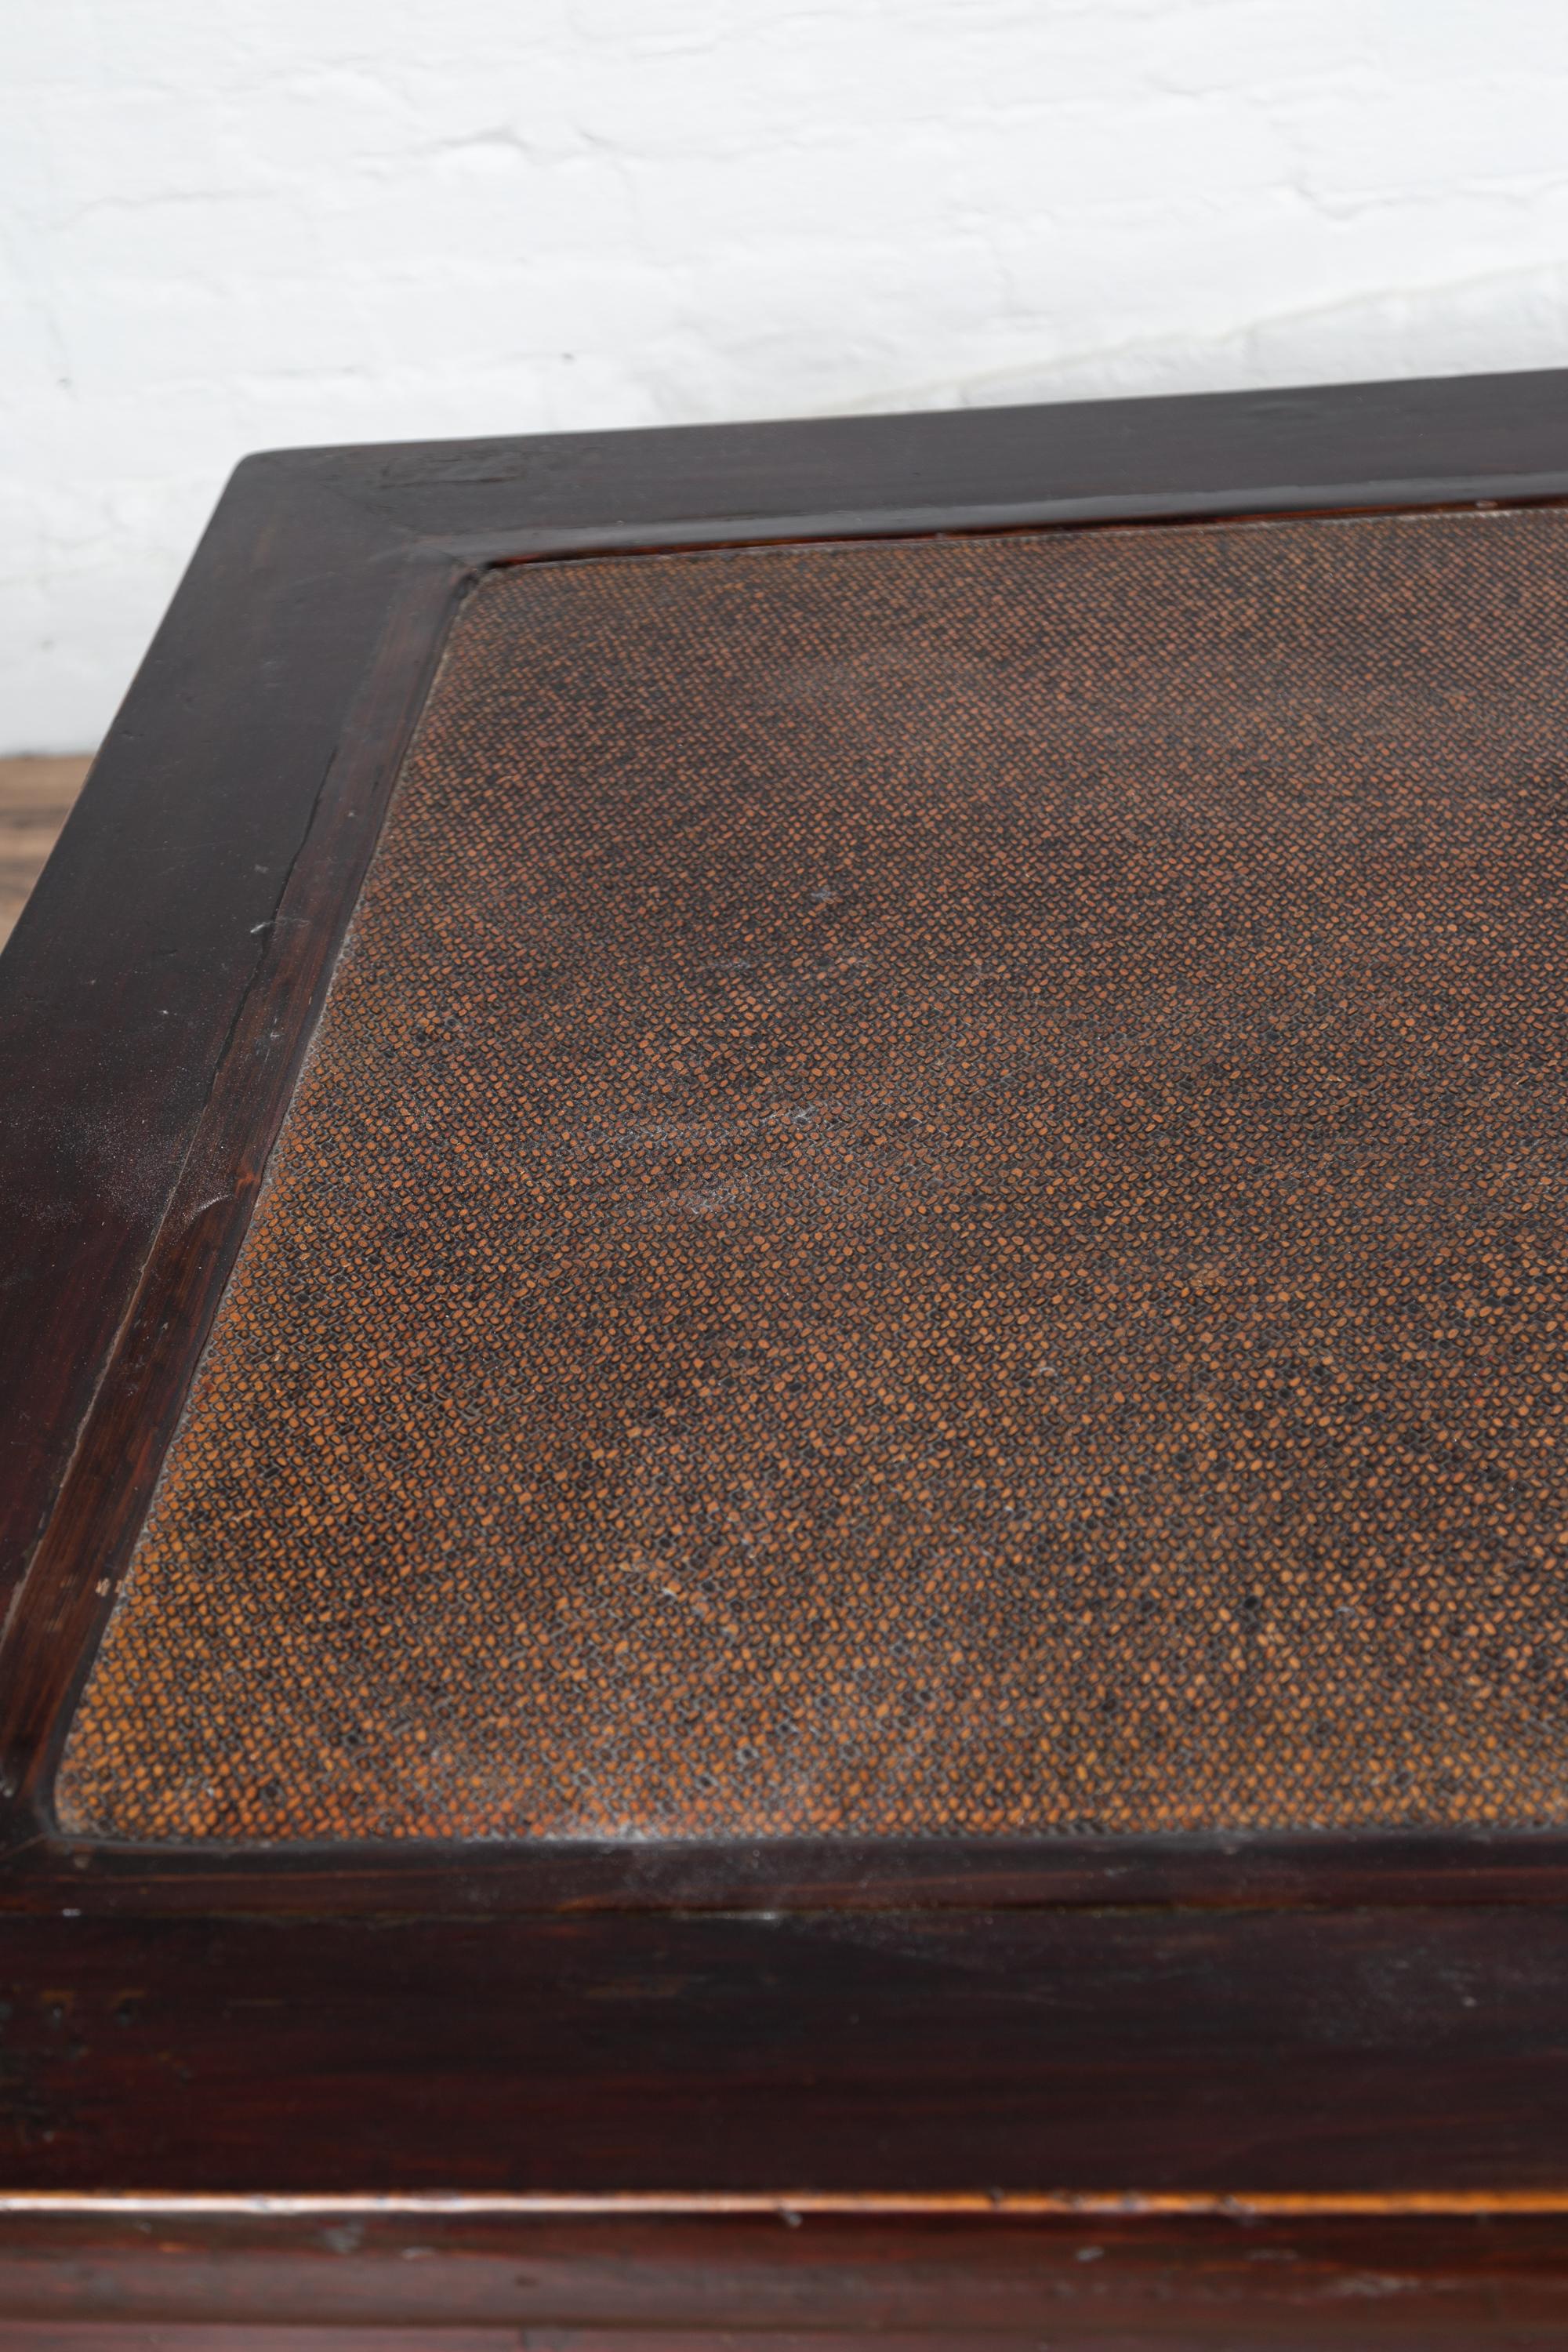 20th Century Antique Chinese Wooden Coffee Table with Dark Patina and Woven Rattan Top